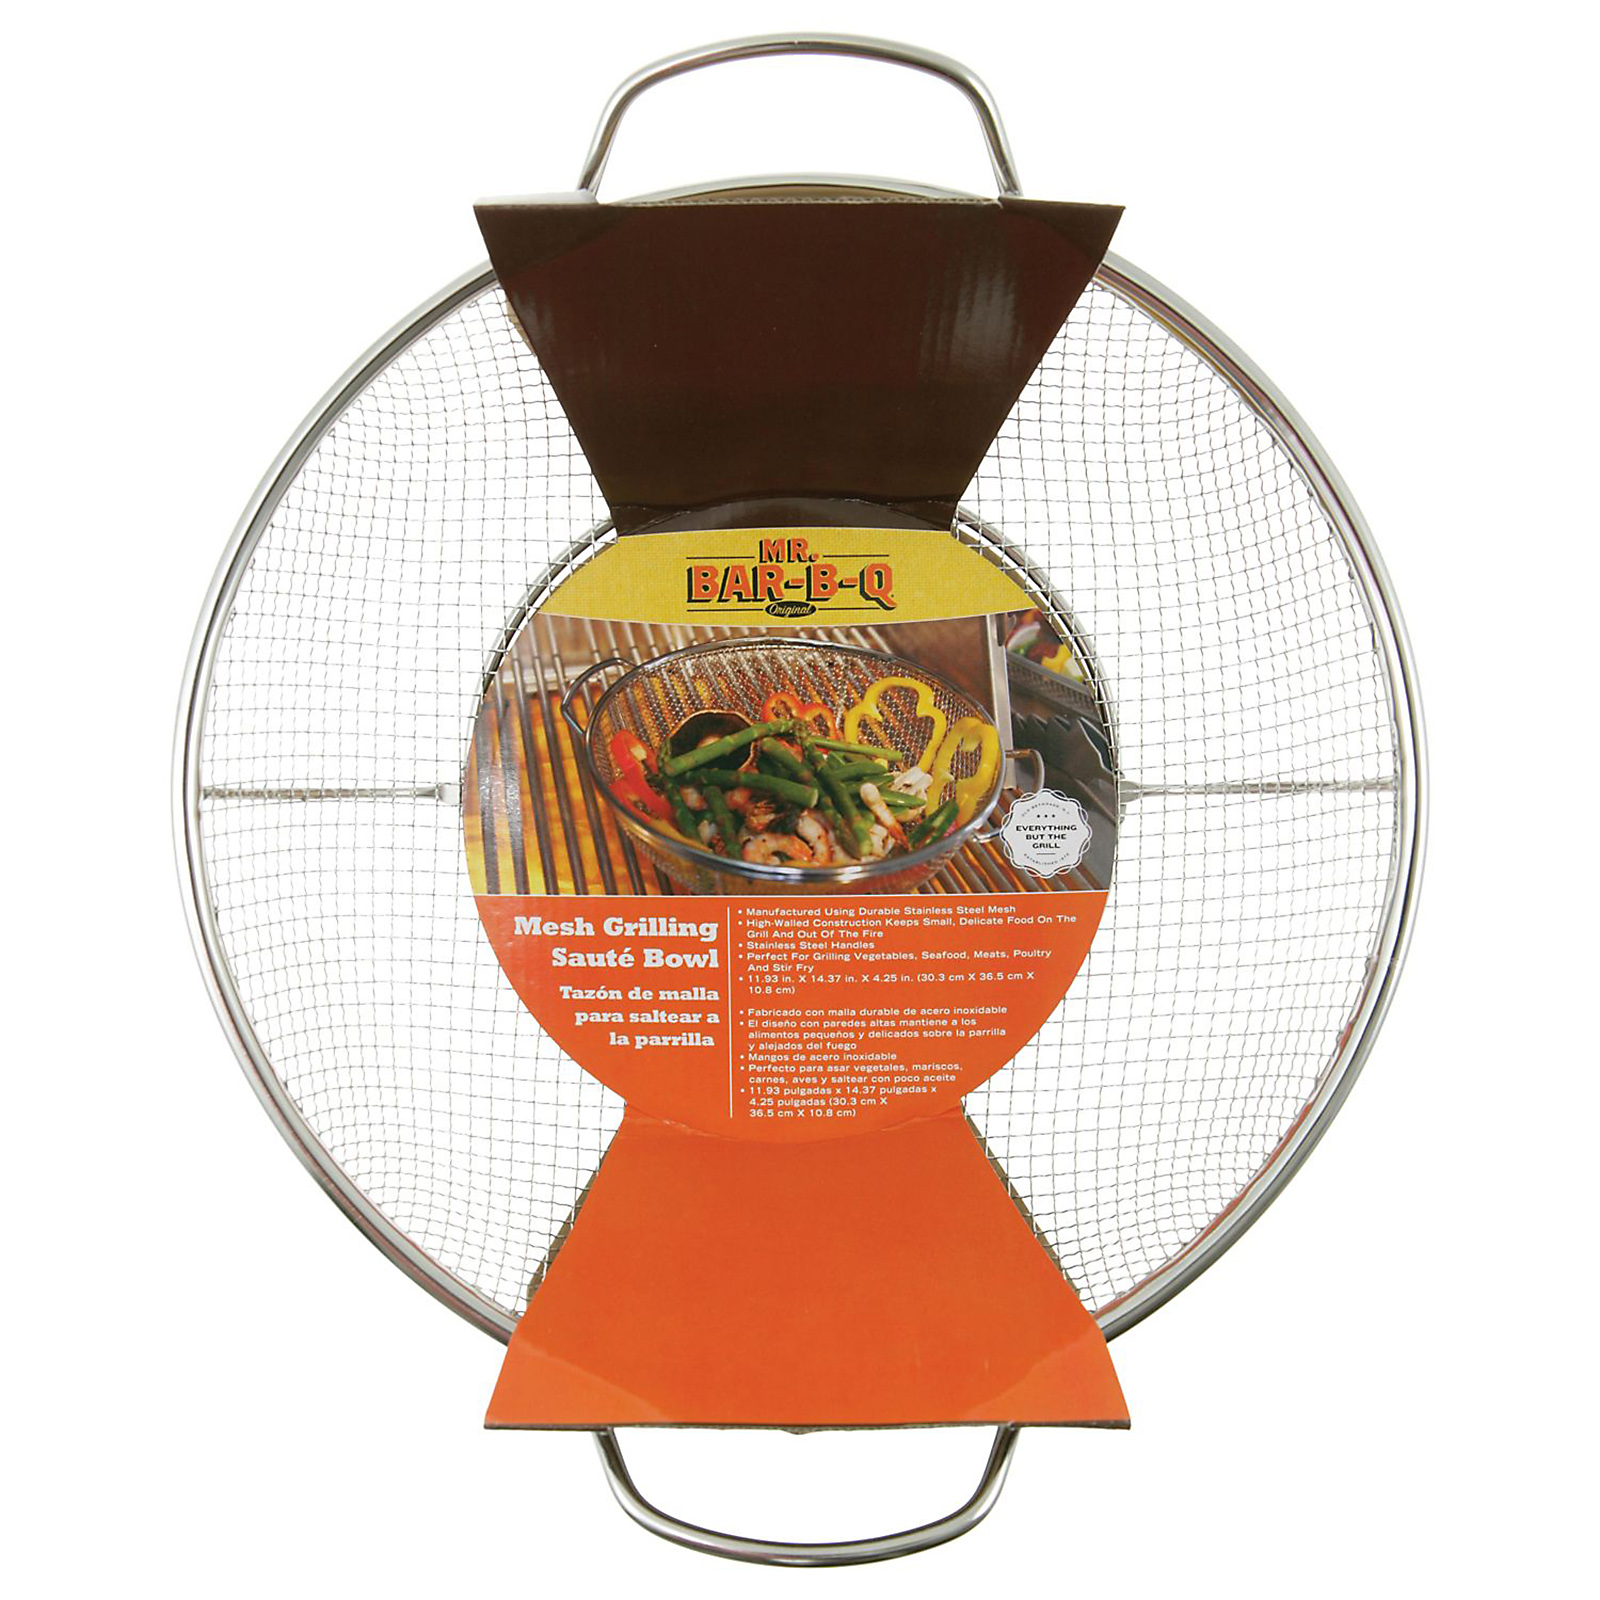 Mr. Bar-B-Q Stainless Steel Mesh Grilling and Sautee Bowl